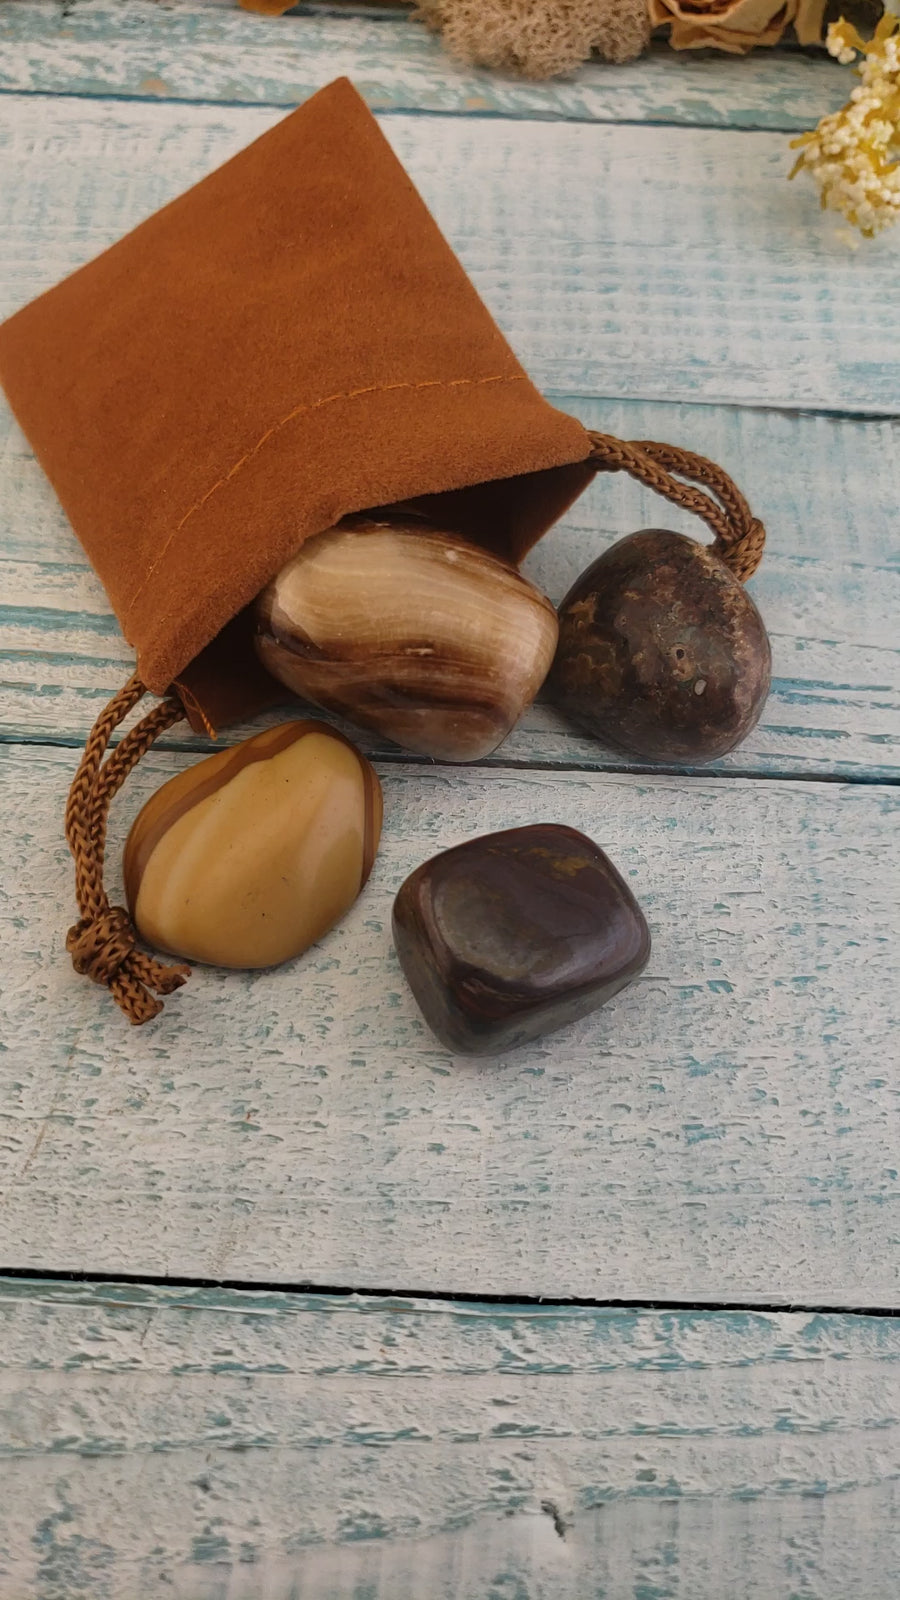 Manifestation of Goals - Set of Four Tumbled Stones with Pouch - Video